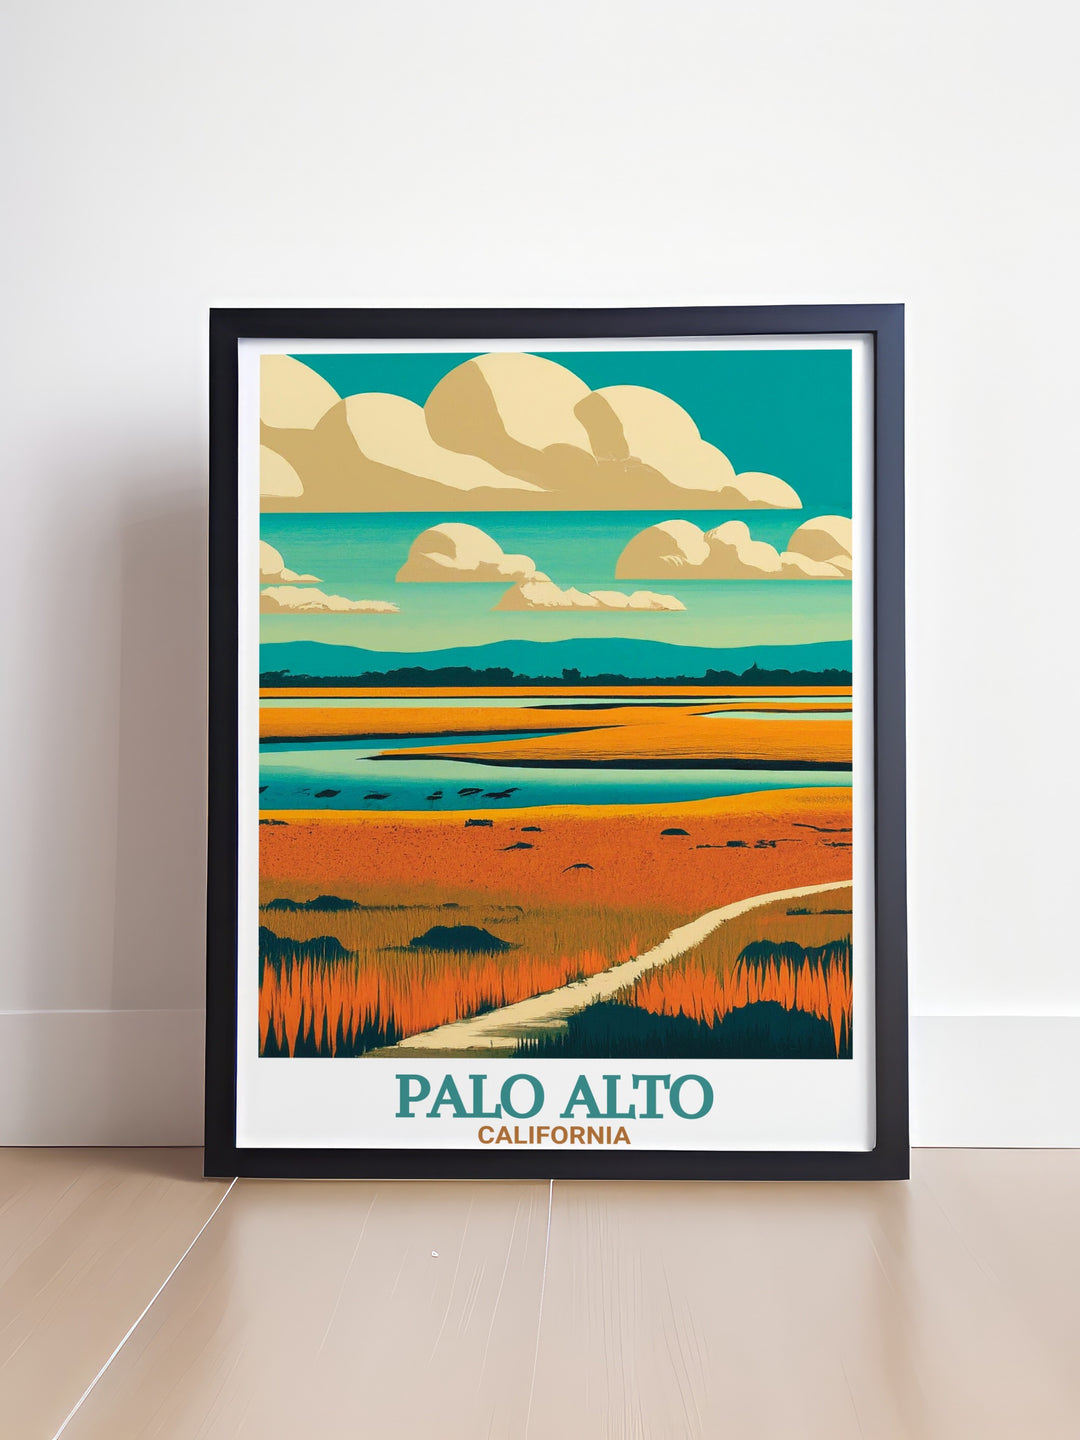 Modern art print of Palo Alto Baylands Nature Preserve a beautiful digital download that offers a unique visual experience blending urban and natural landscapes of Palo Alto California ideal for home or office decor.